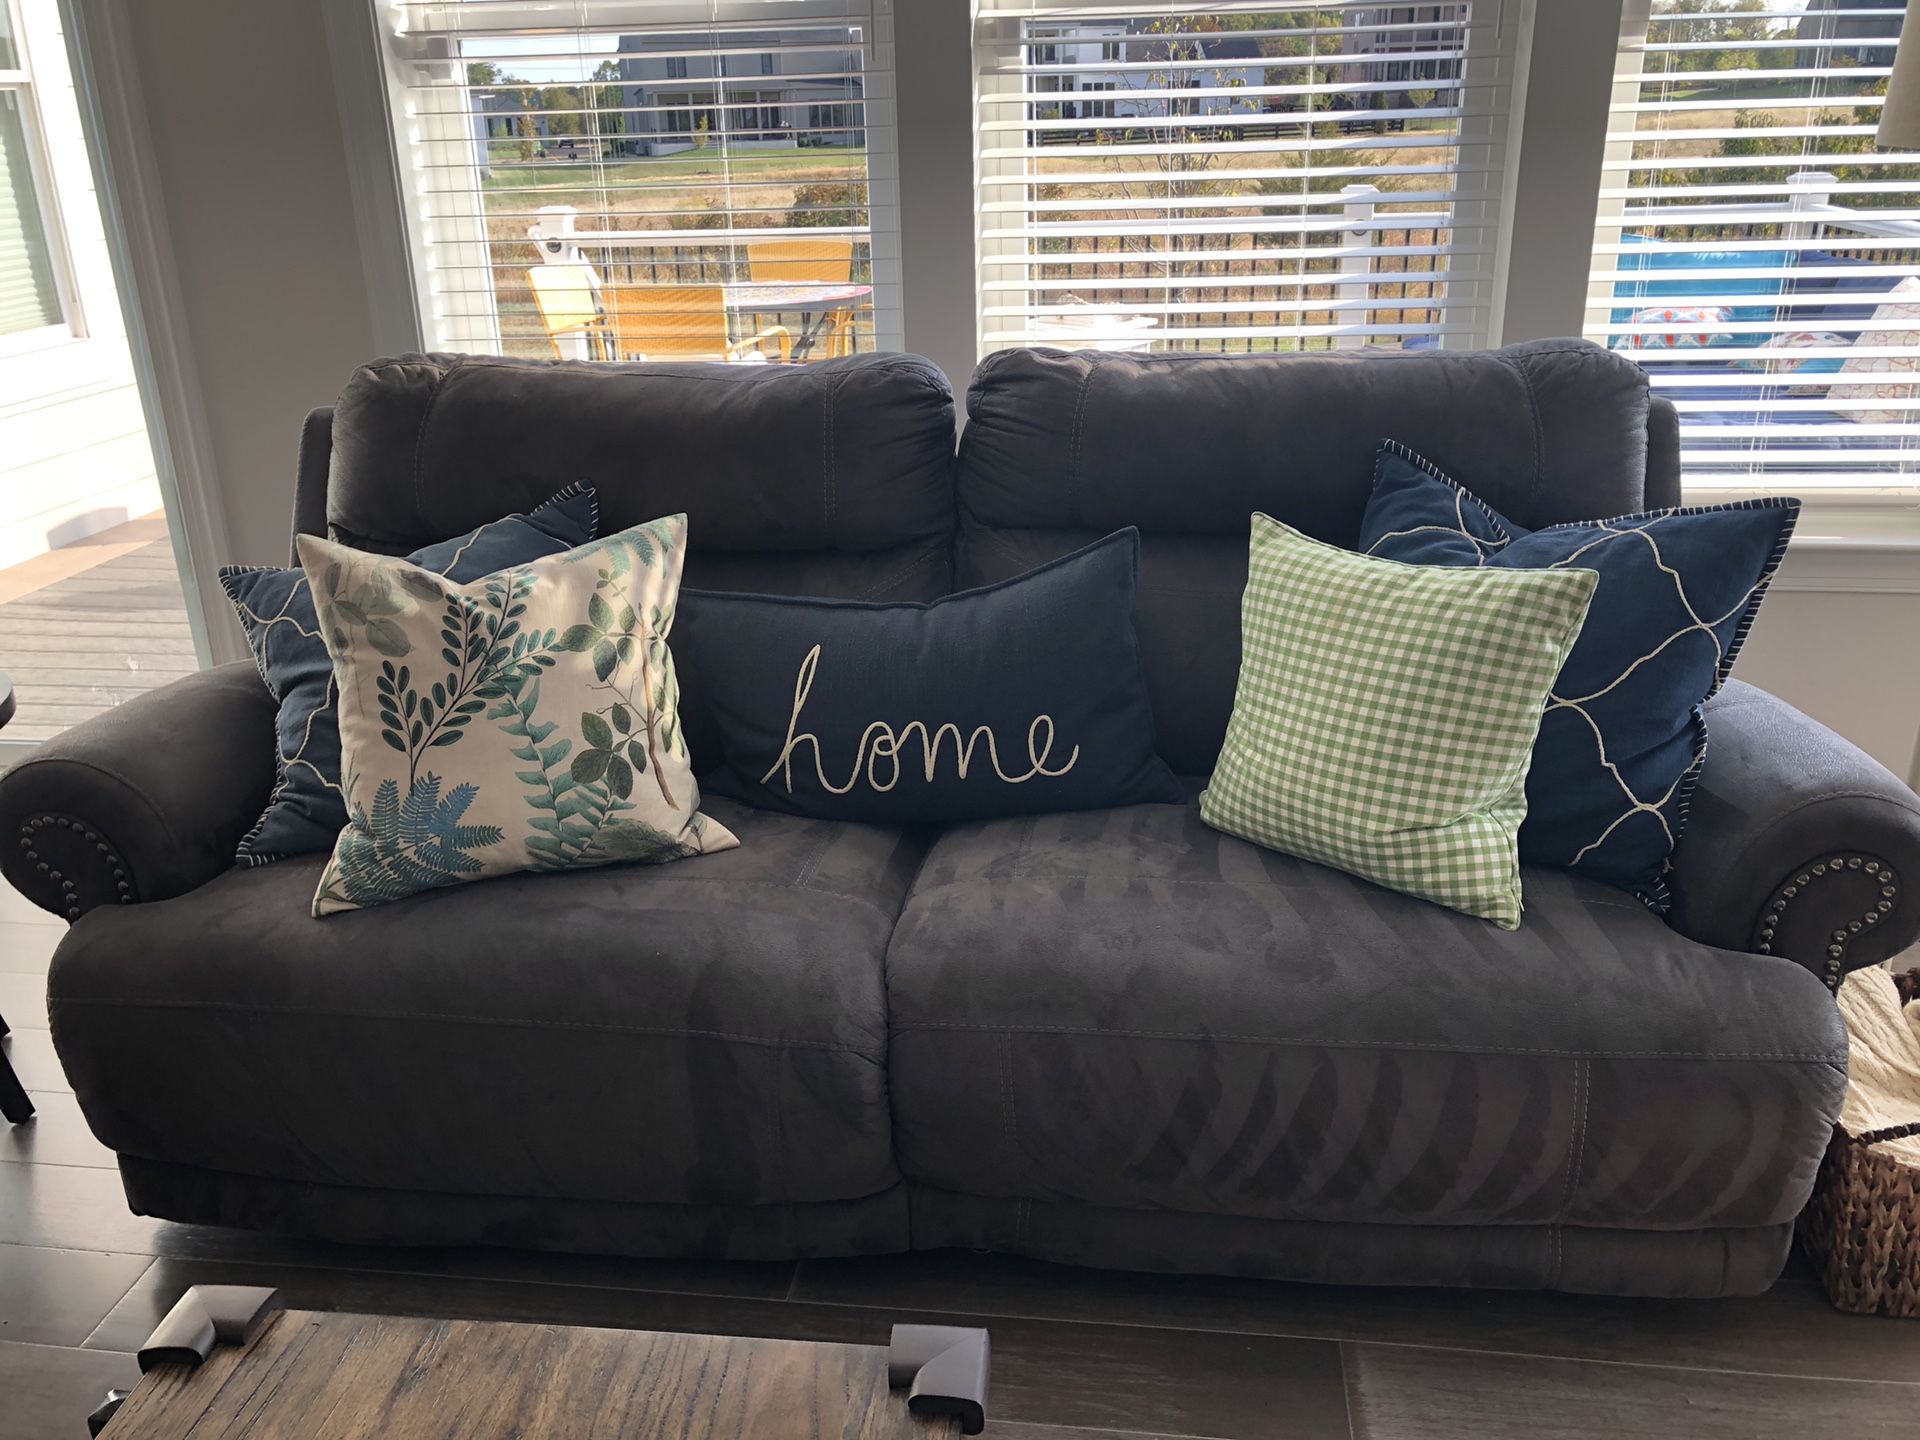 Gray Living Room Sofa Set in Great Condition